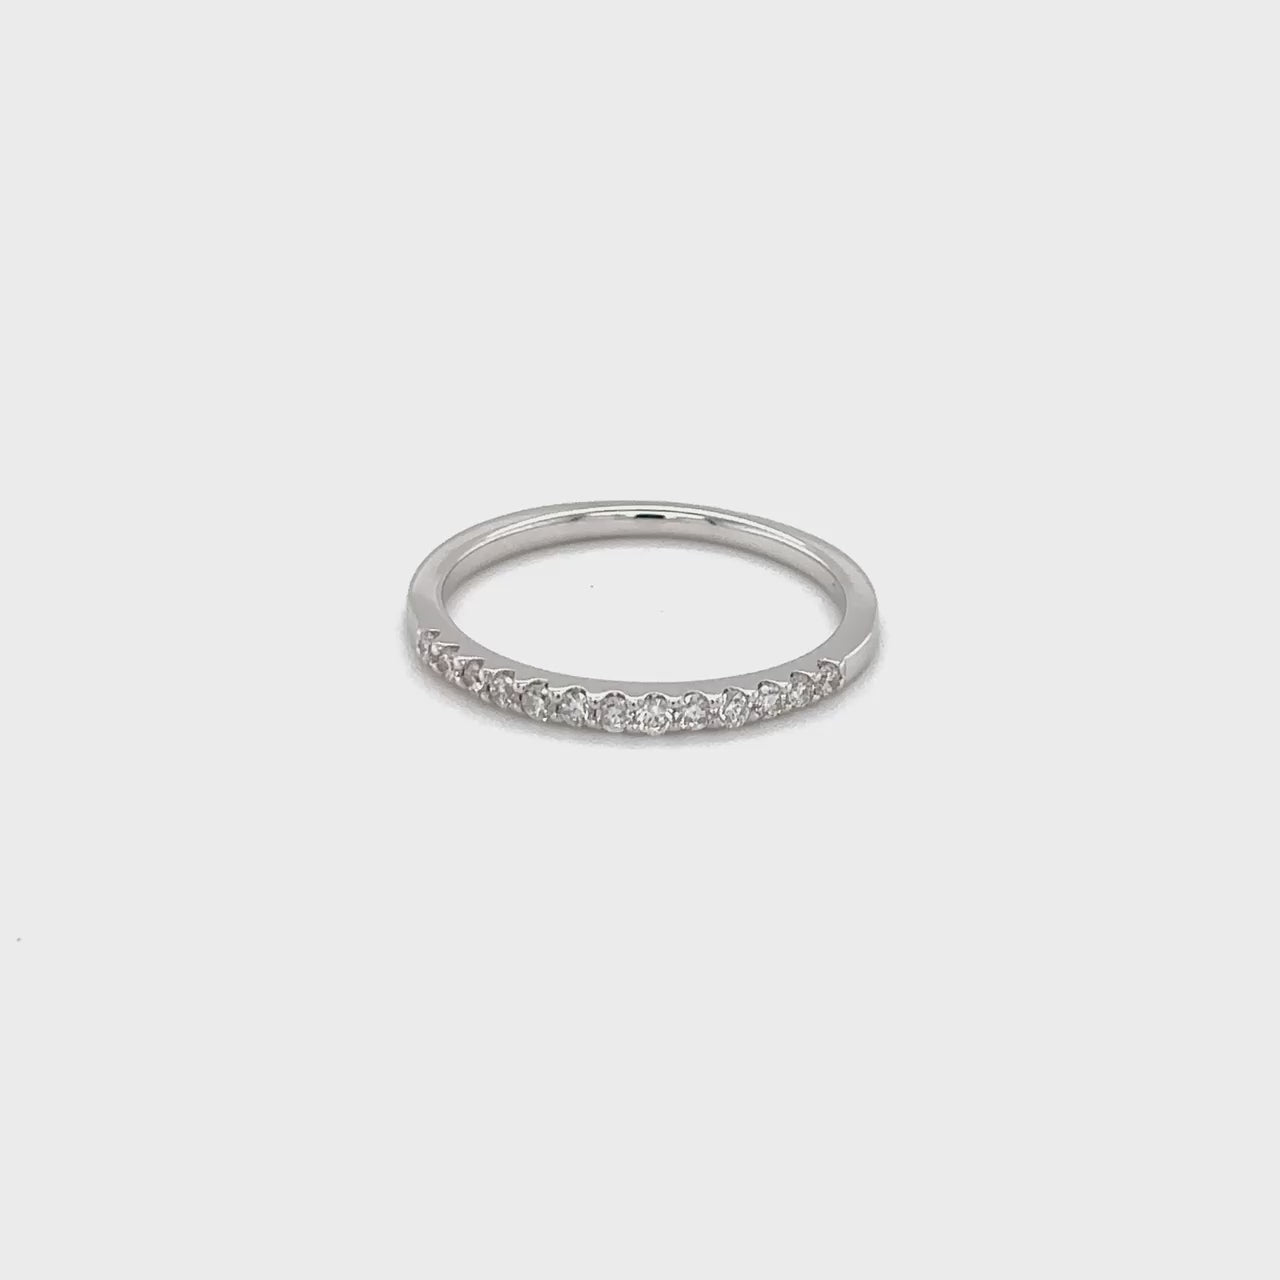 A sparkling, Round Brilliant Half Eternity Diamond Ring, showcasing timeless elegance, exquisite craftsmanship, and unparalleled beauty, perfect for celebrating milestones, symbolizing eternal love, and adding a touch of luxury to any ensemble.